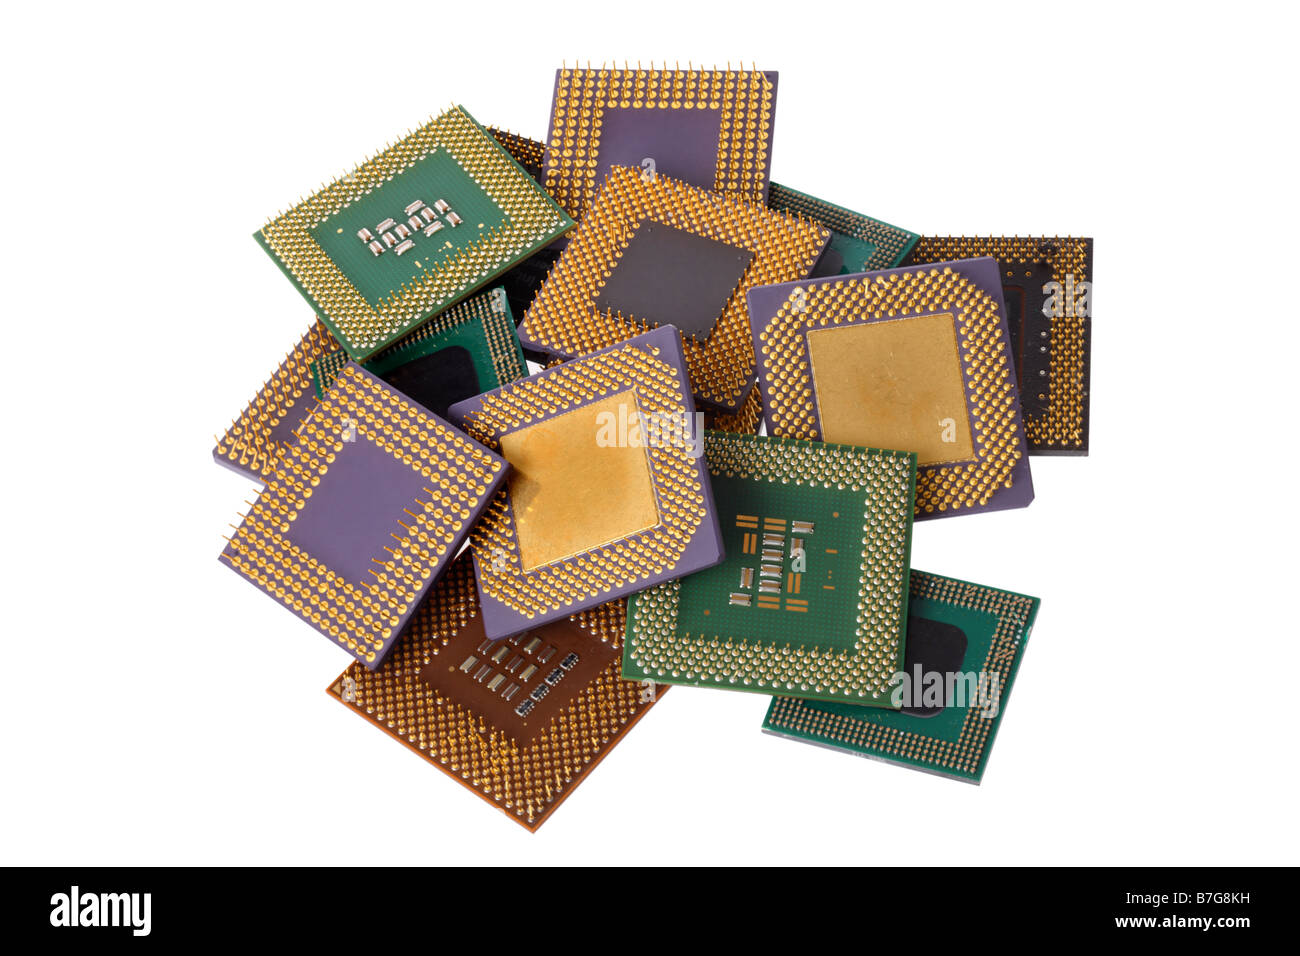 Pile of computer processor chips cut out on white background Stock Photo